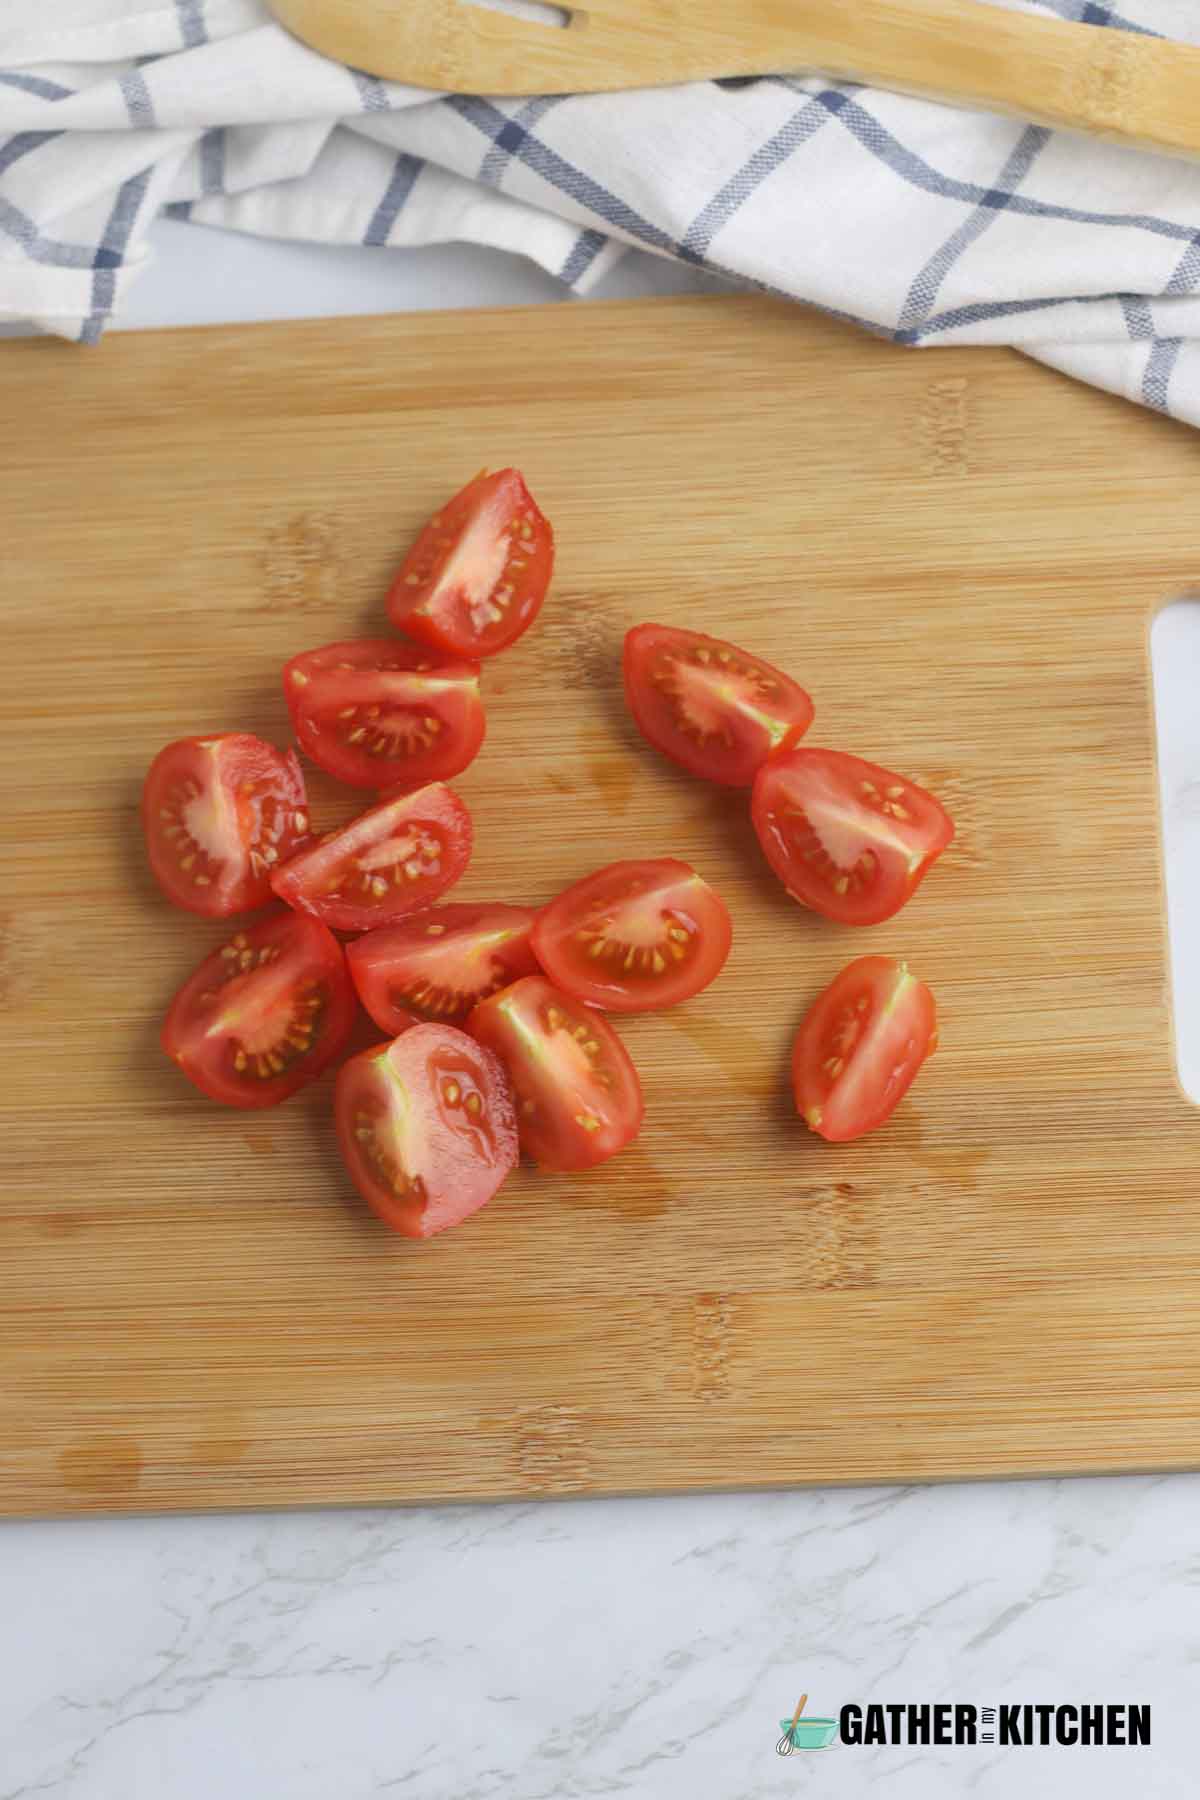 Roughly chopped tomatoes on cutting board.